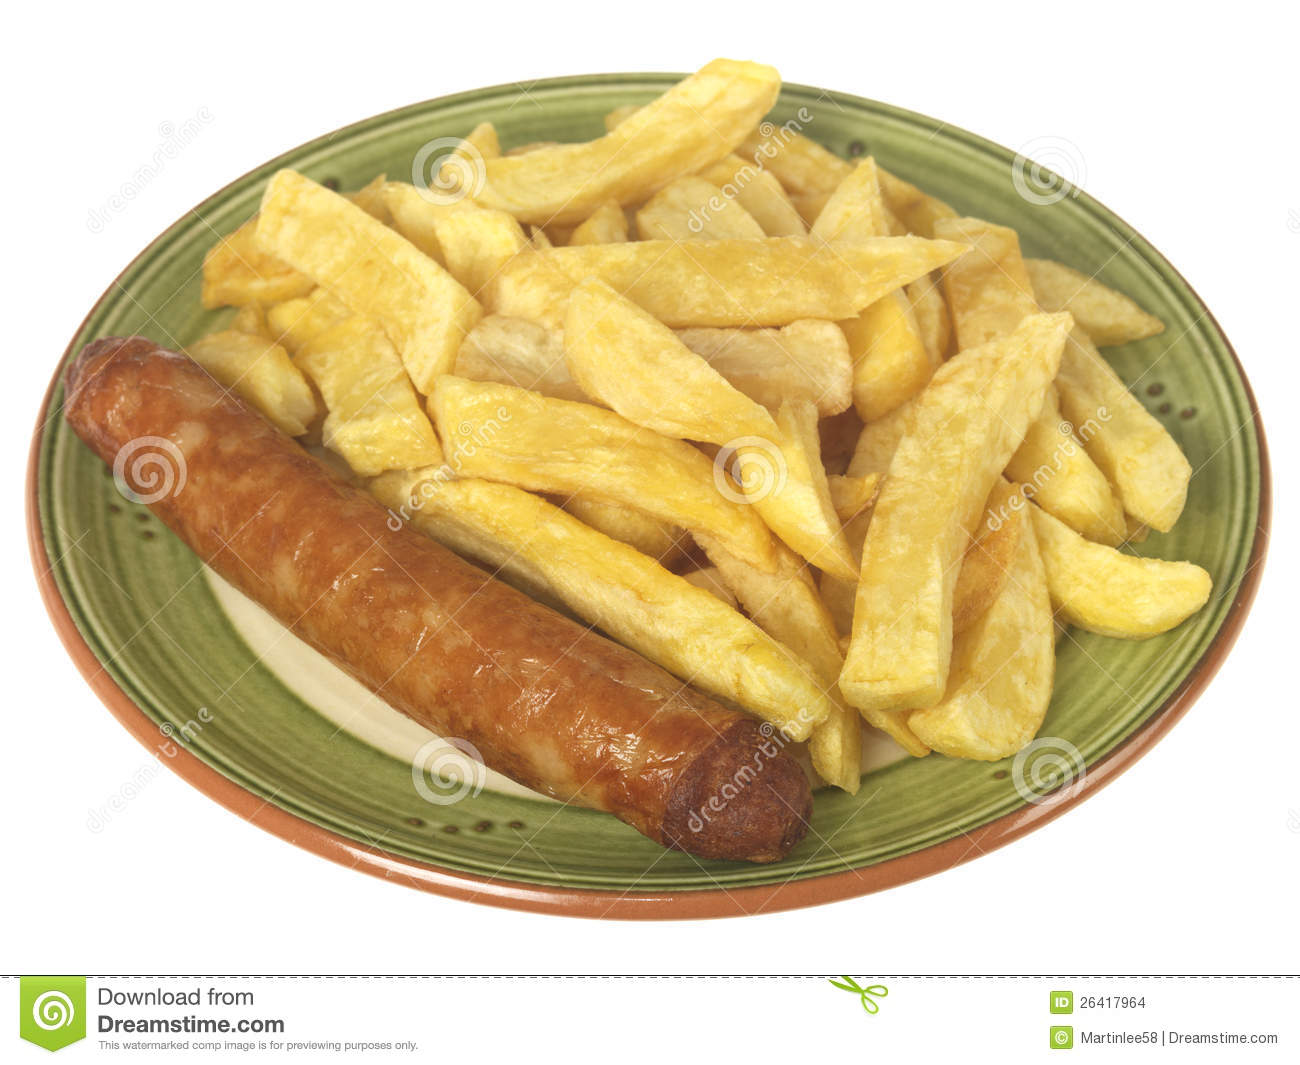 Sausage and chips.